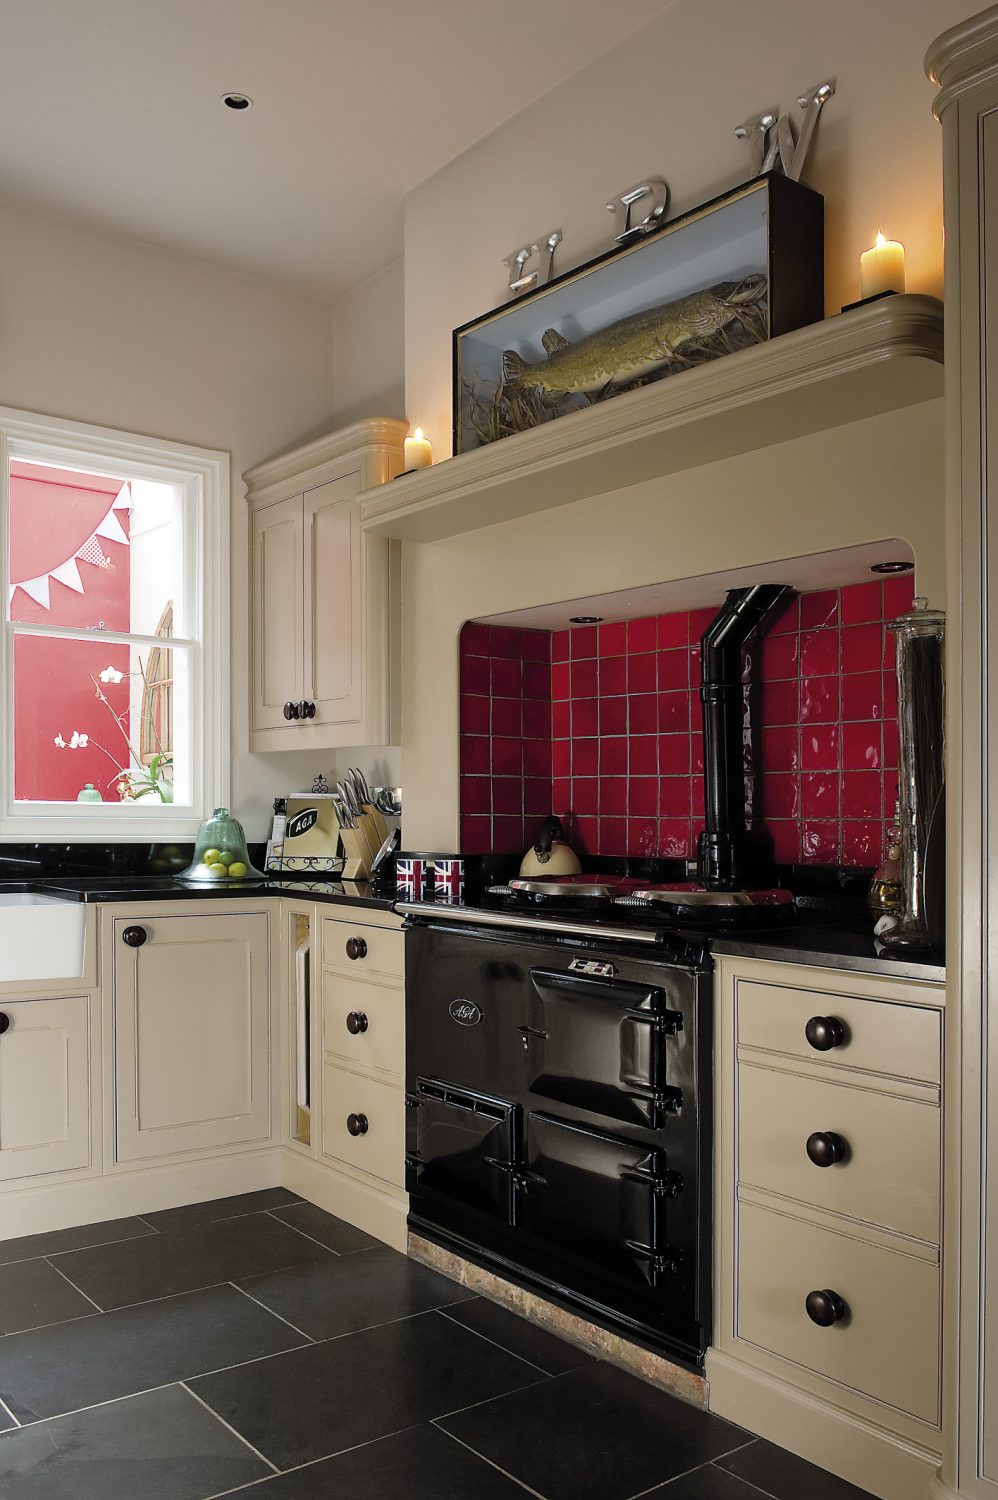 A shiny black Aga warms the room and behind it, the alcove has been covered with scarlet tiles. Sally loves to cook so it’s also a very practical and efficient space: “The Aga was non-negotiable,” she says flatly. “I’ve always cooked with one.”